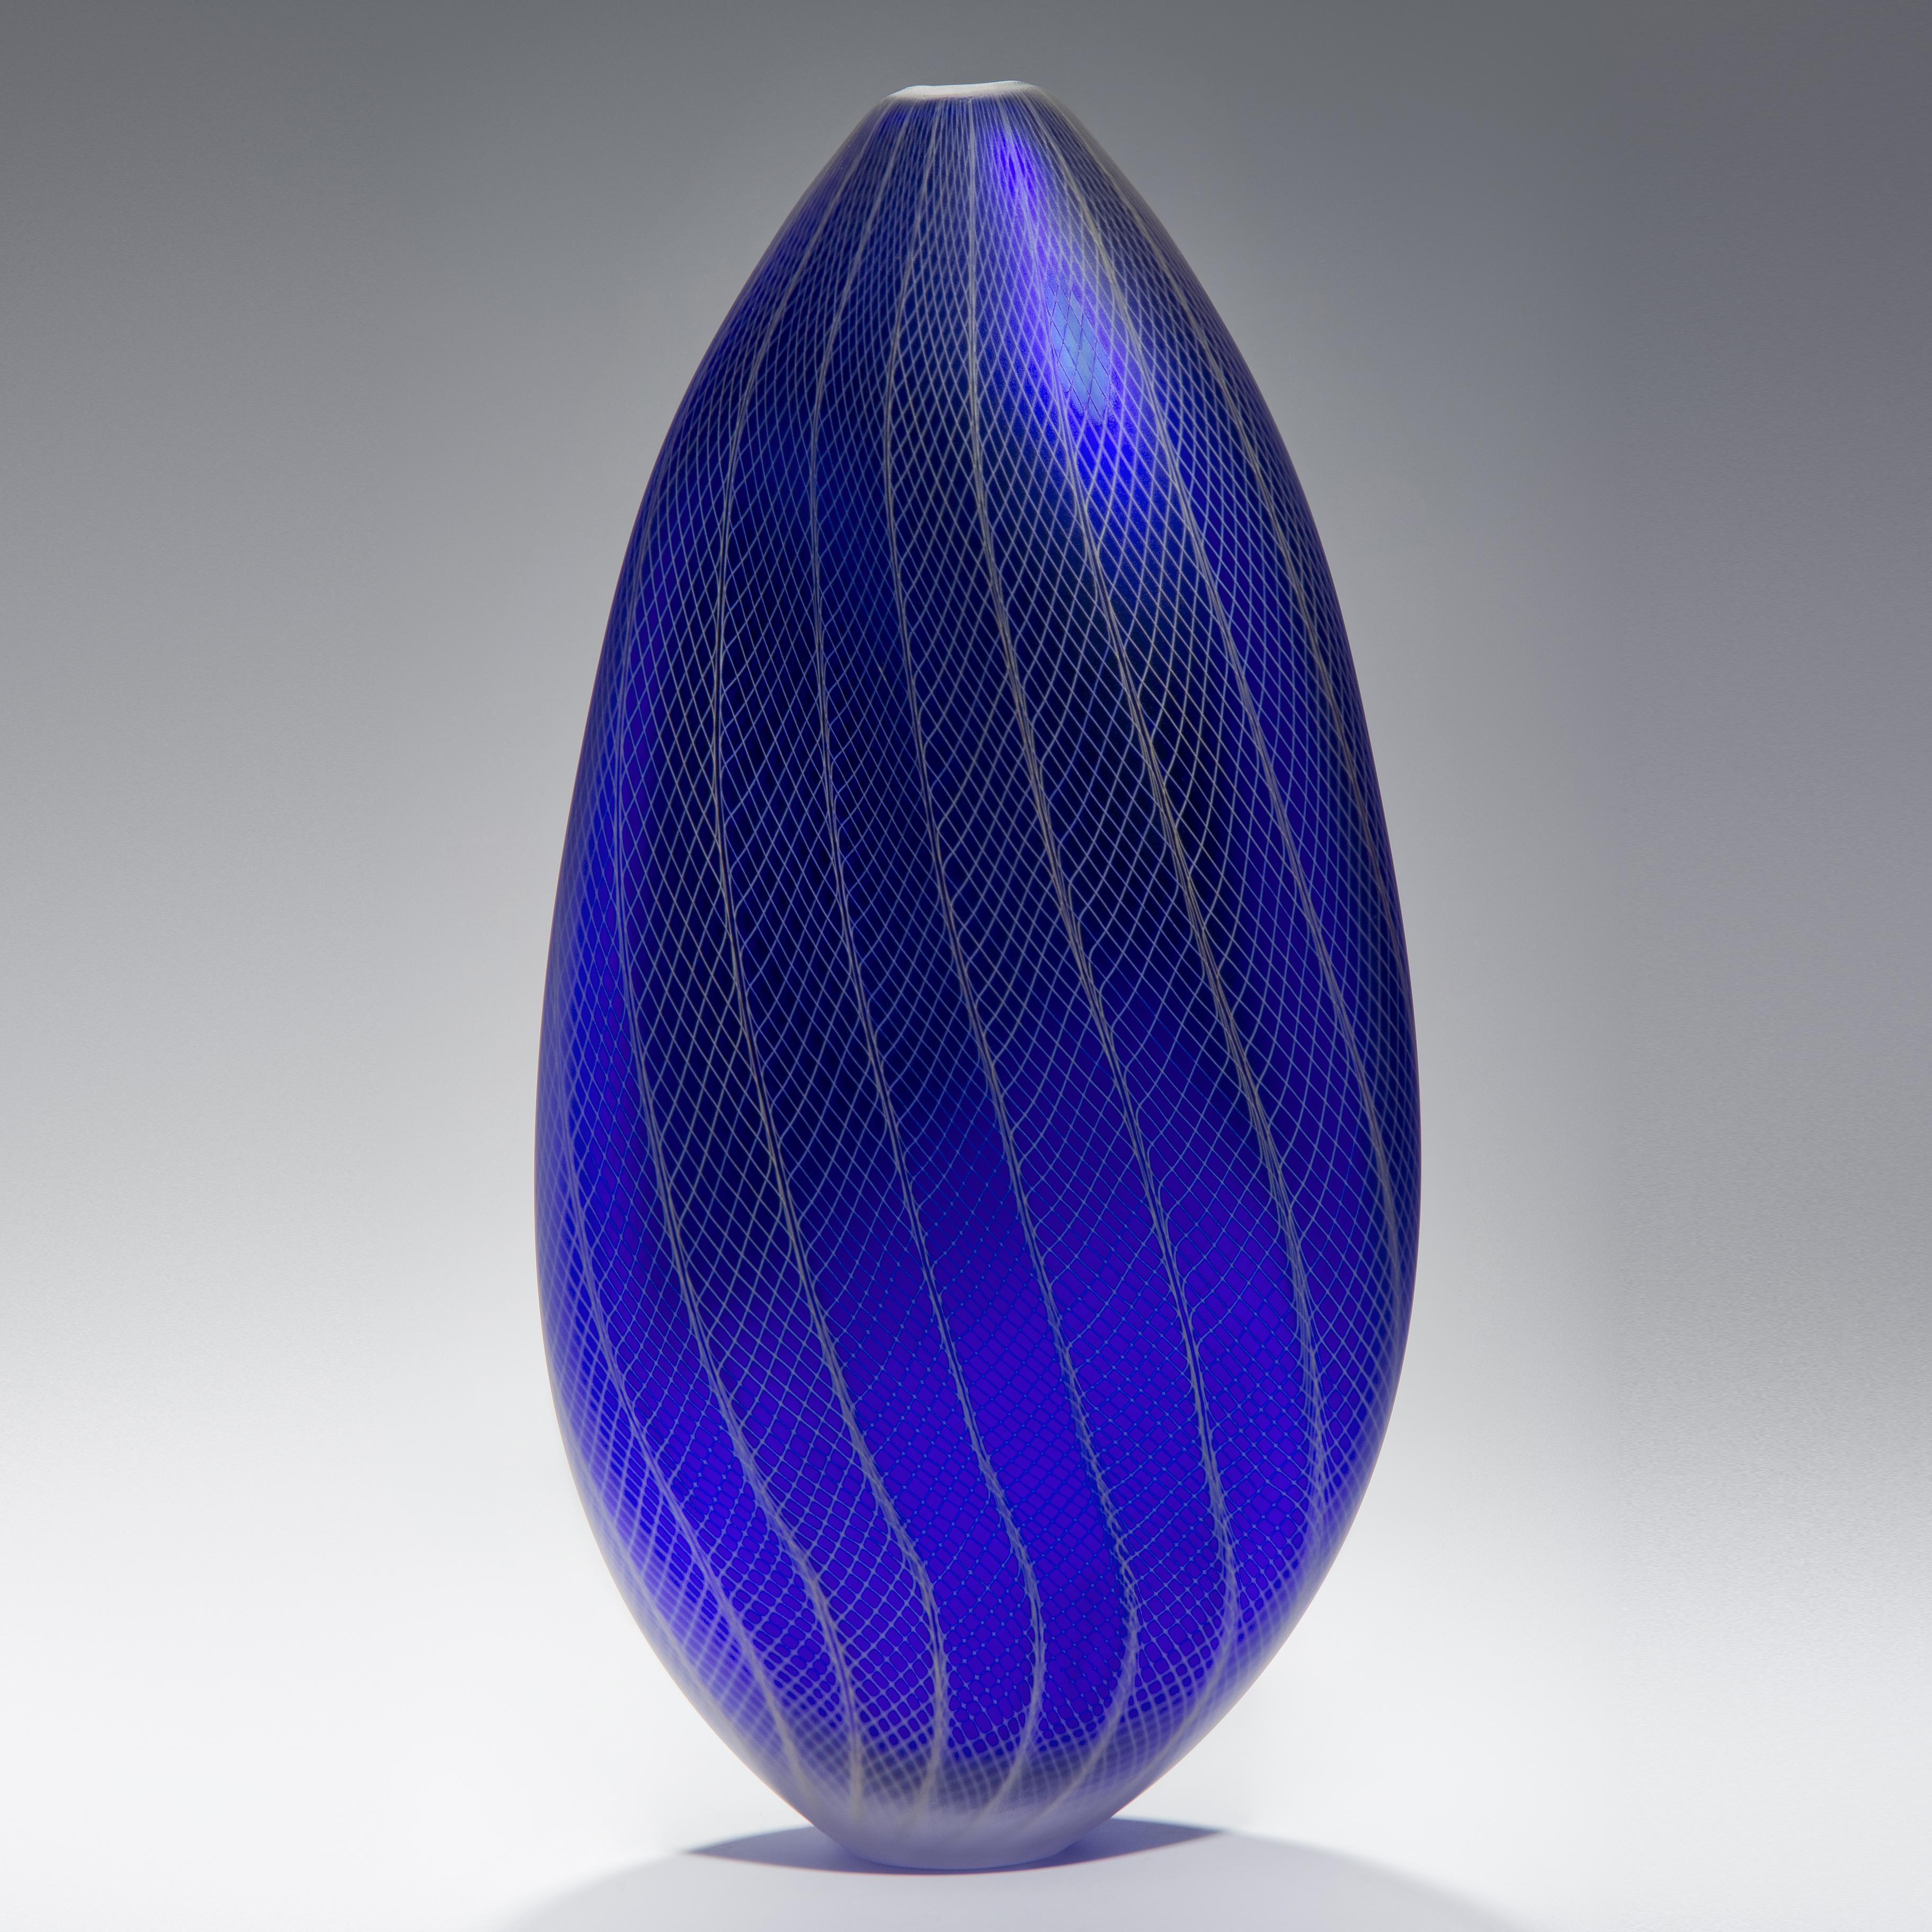 Stratiform Cobaltum 1.0.001 is a unique handblown glass vessel with fine filigree cane detail created by the British artist Liam Reeves. Handblown in colbalt blue and white coloured glass, the interior has a mirrored finish, which results in a